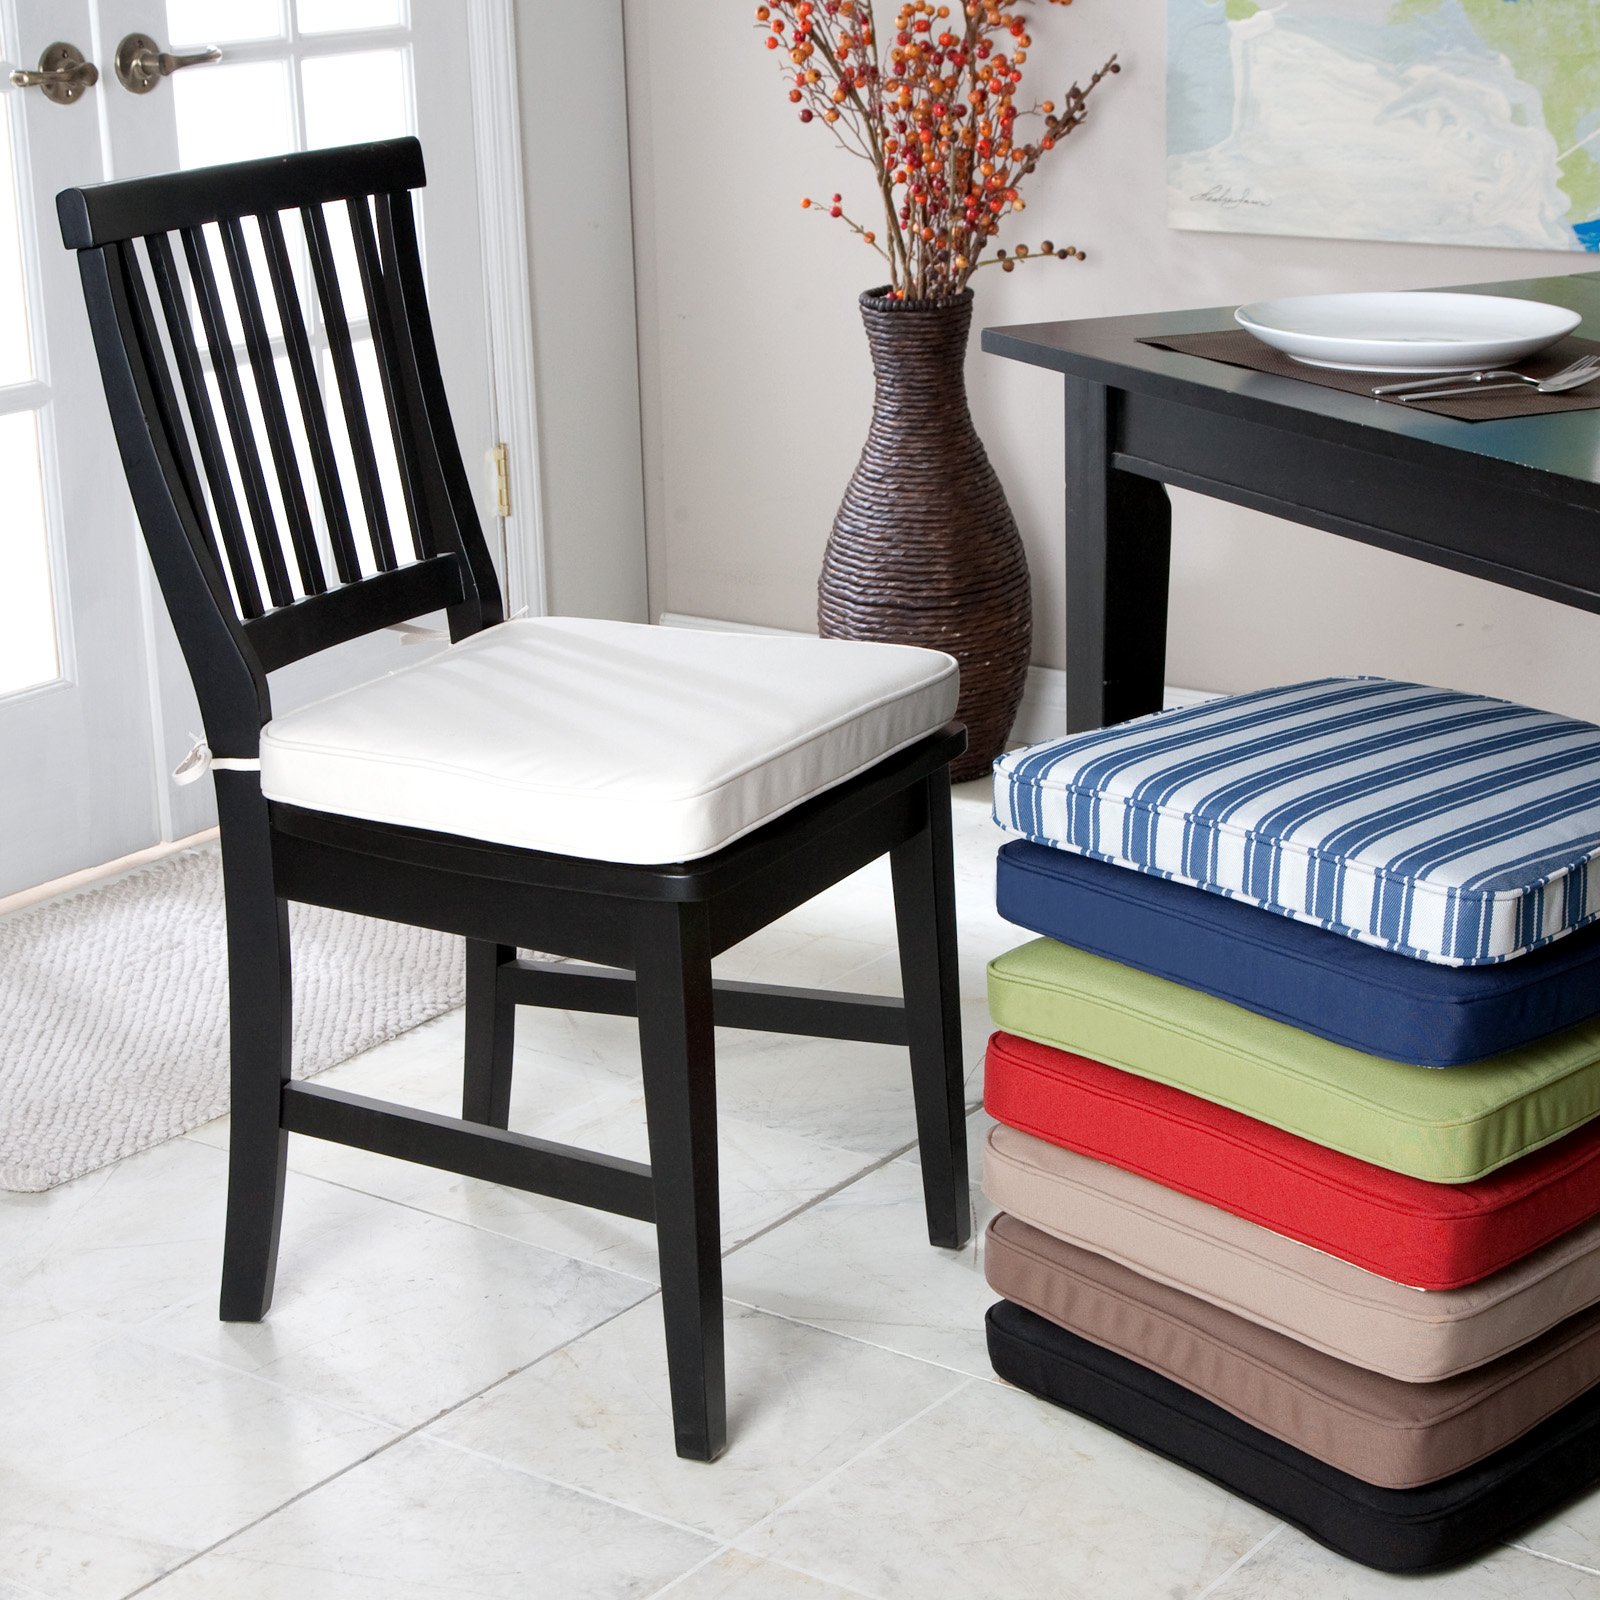 Dining room chair cushions seat cushions dining room chairs large and beautiful best seat cushion for TBPXCJL